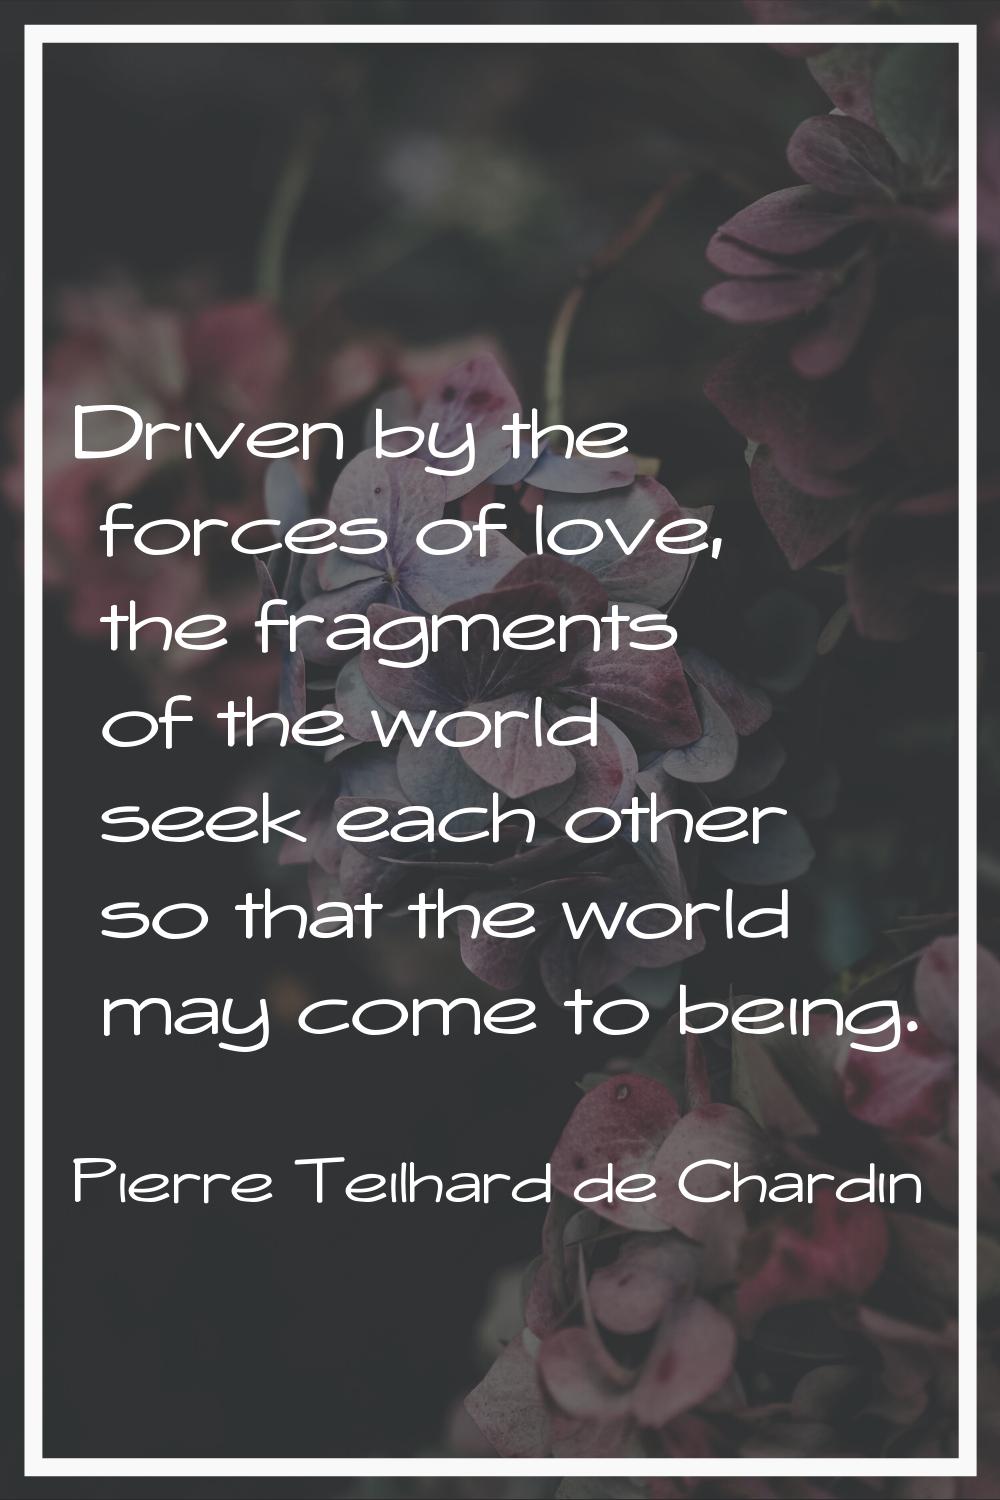 Driven by the forces of love, the fragments of the world seek each other so that the world may come